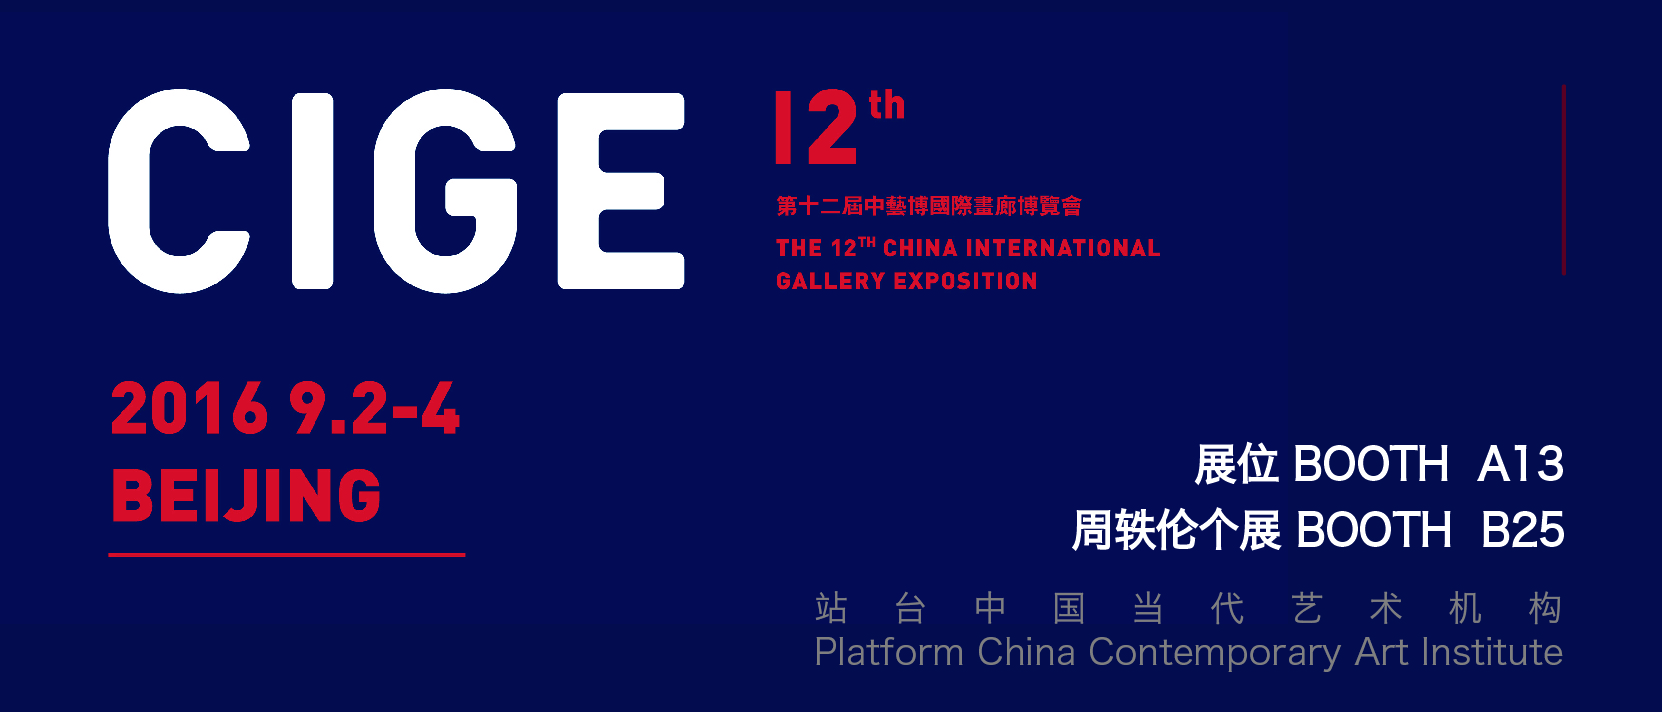 The 12th China International Gallery Exposition | Platform China